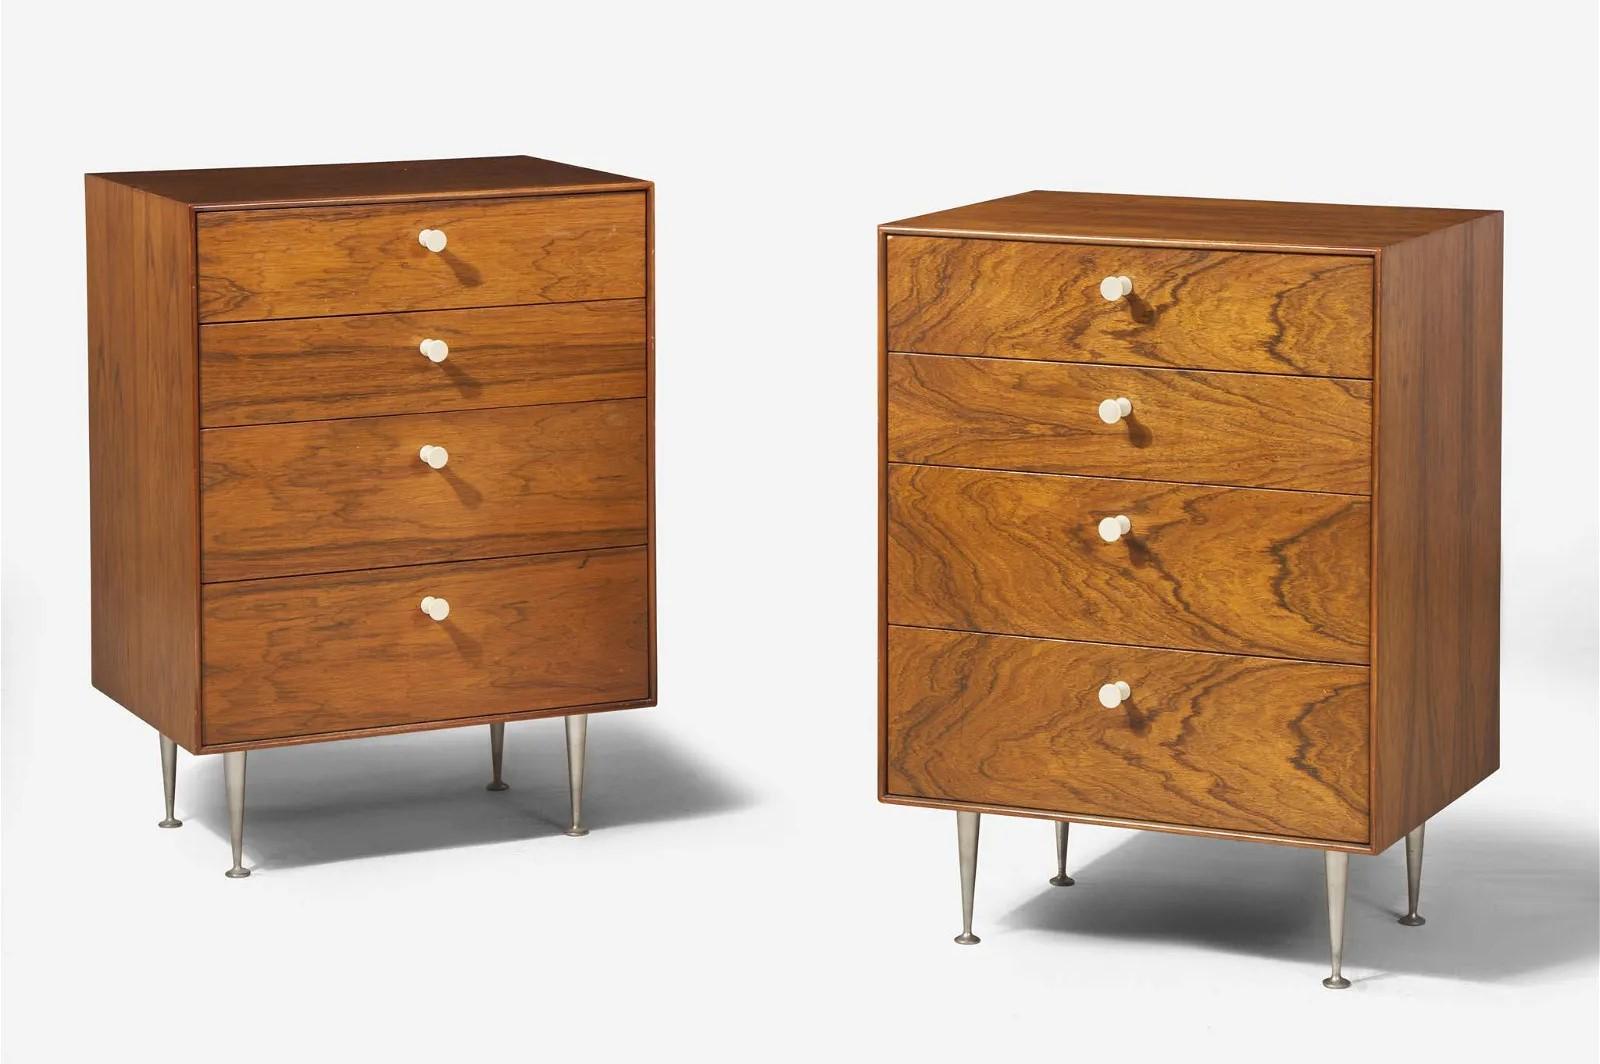 Pair of George Nelson thin edge chests or nightstands. The items are rosewood veneer with four pull-out drawers and metal legs.